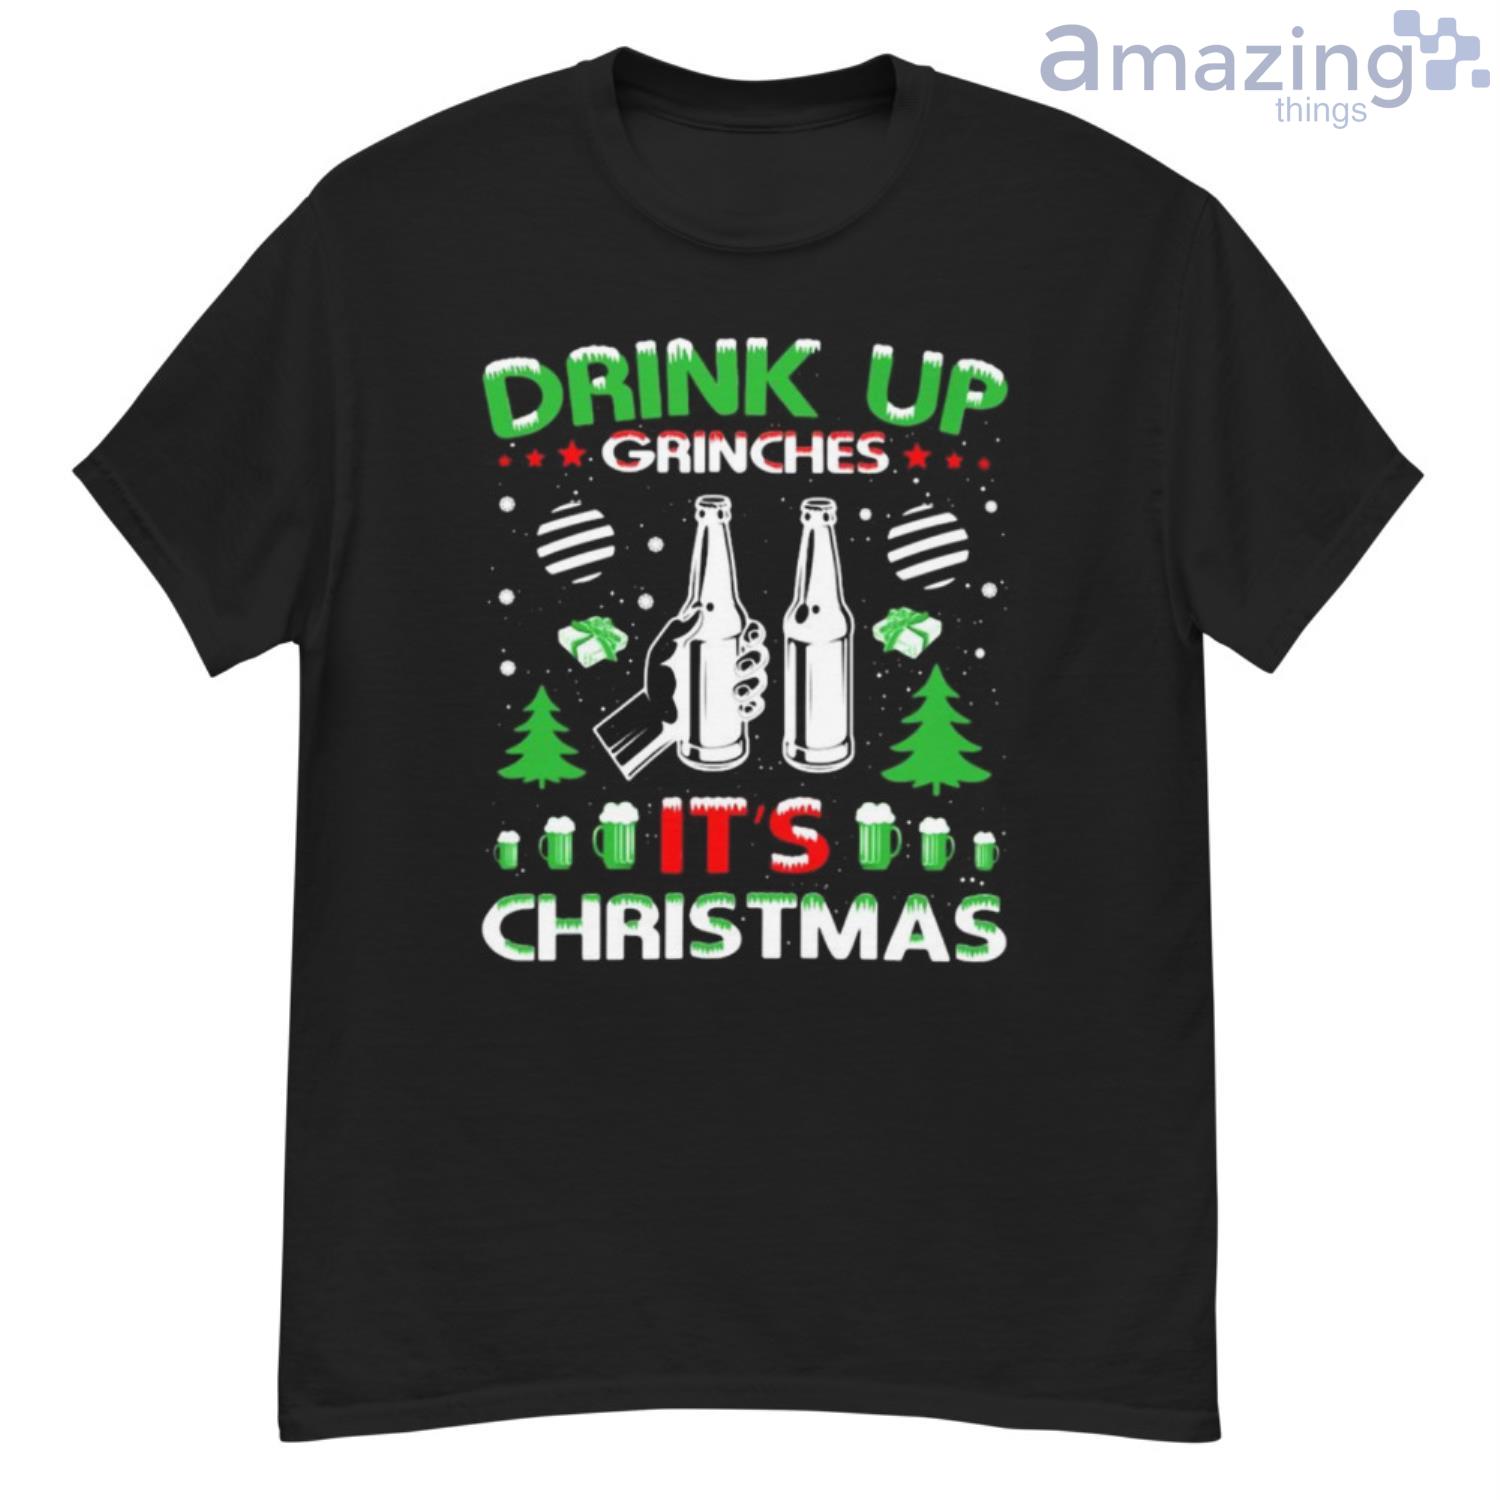 Drink Up Grinches It’s Christmas Sweater T-shirt - G500 Men’s Classic T-Shirt